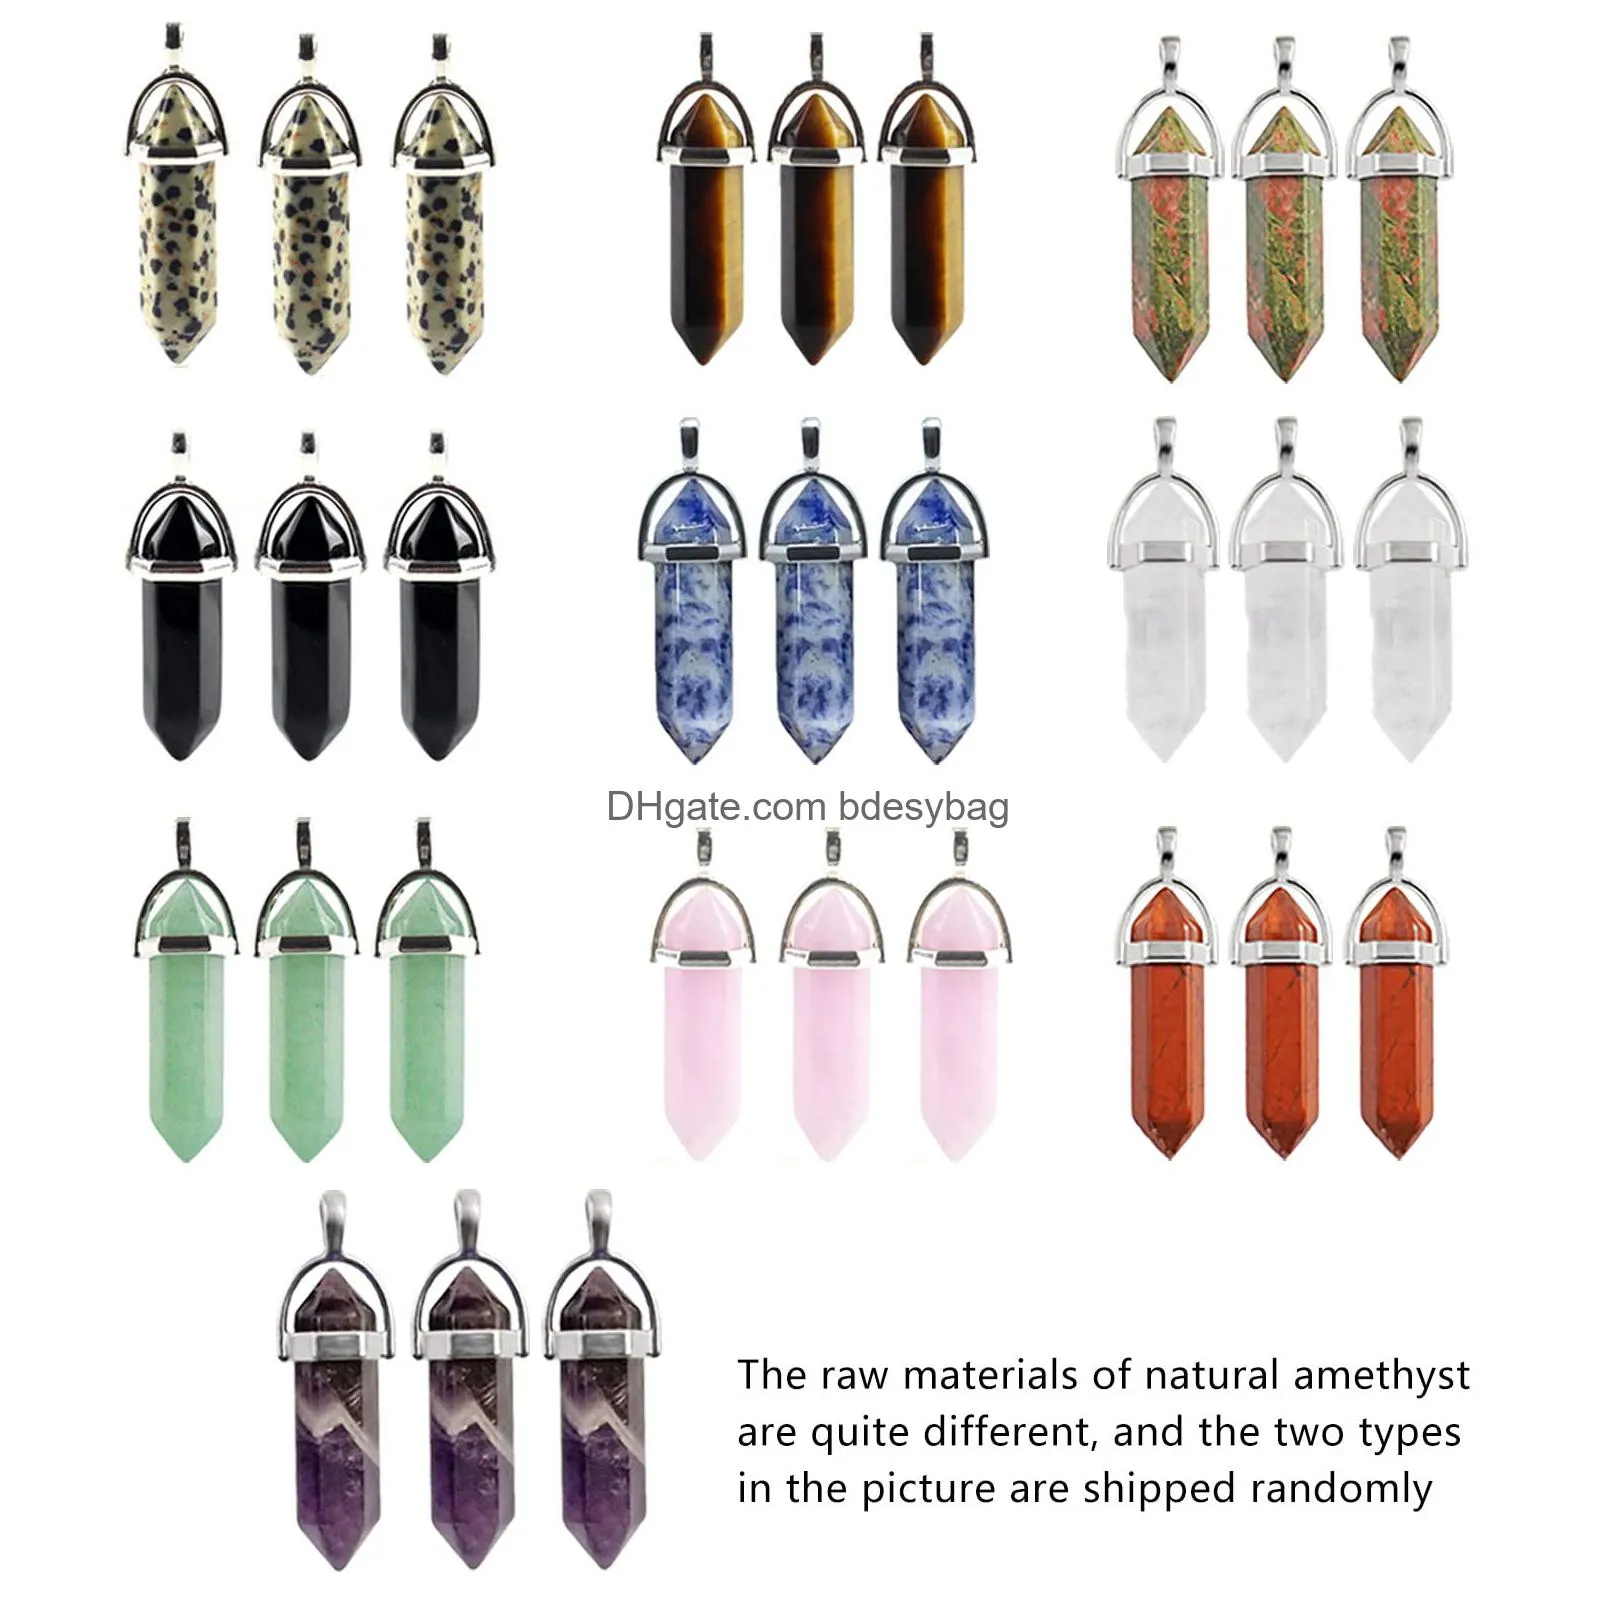 hexagonal chakra pendant bullet shape crystal pendant healing pointed quartz charms gemstone natural prism stone chakra beads for diy necklace earrings bracelet jewelry making 10 colors